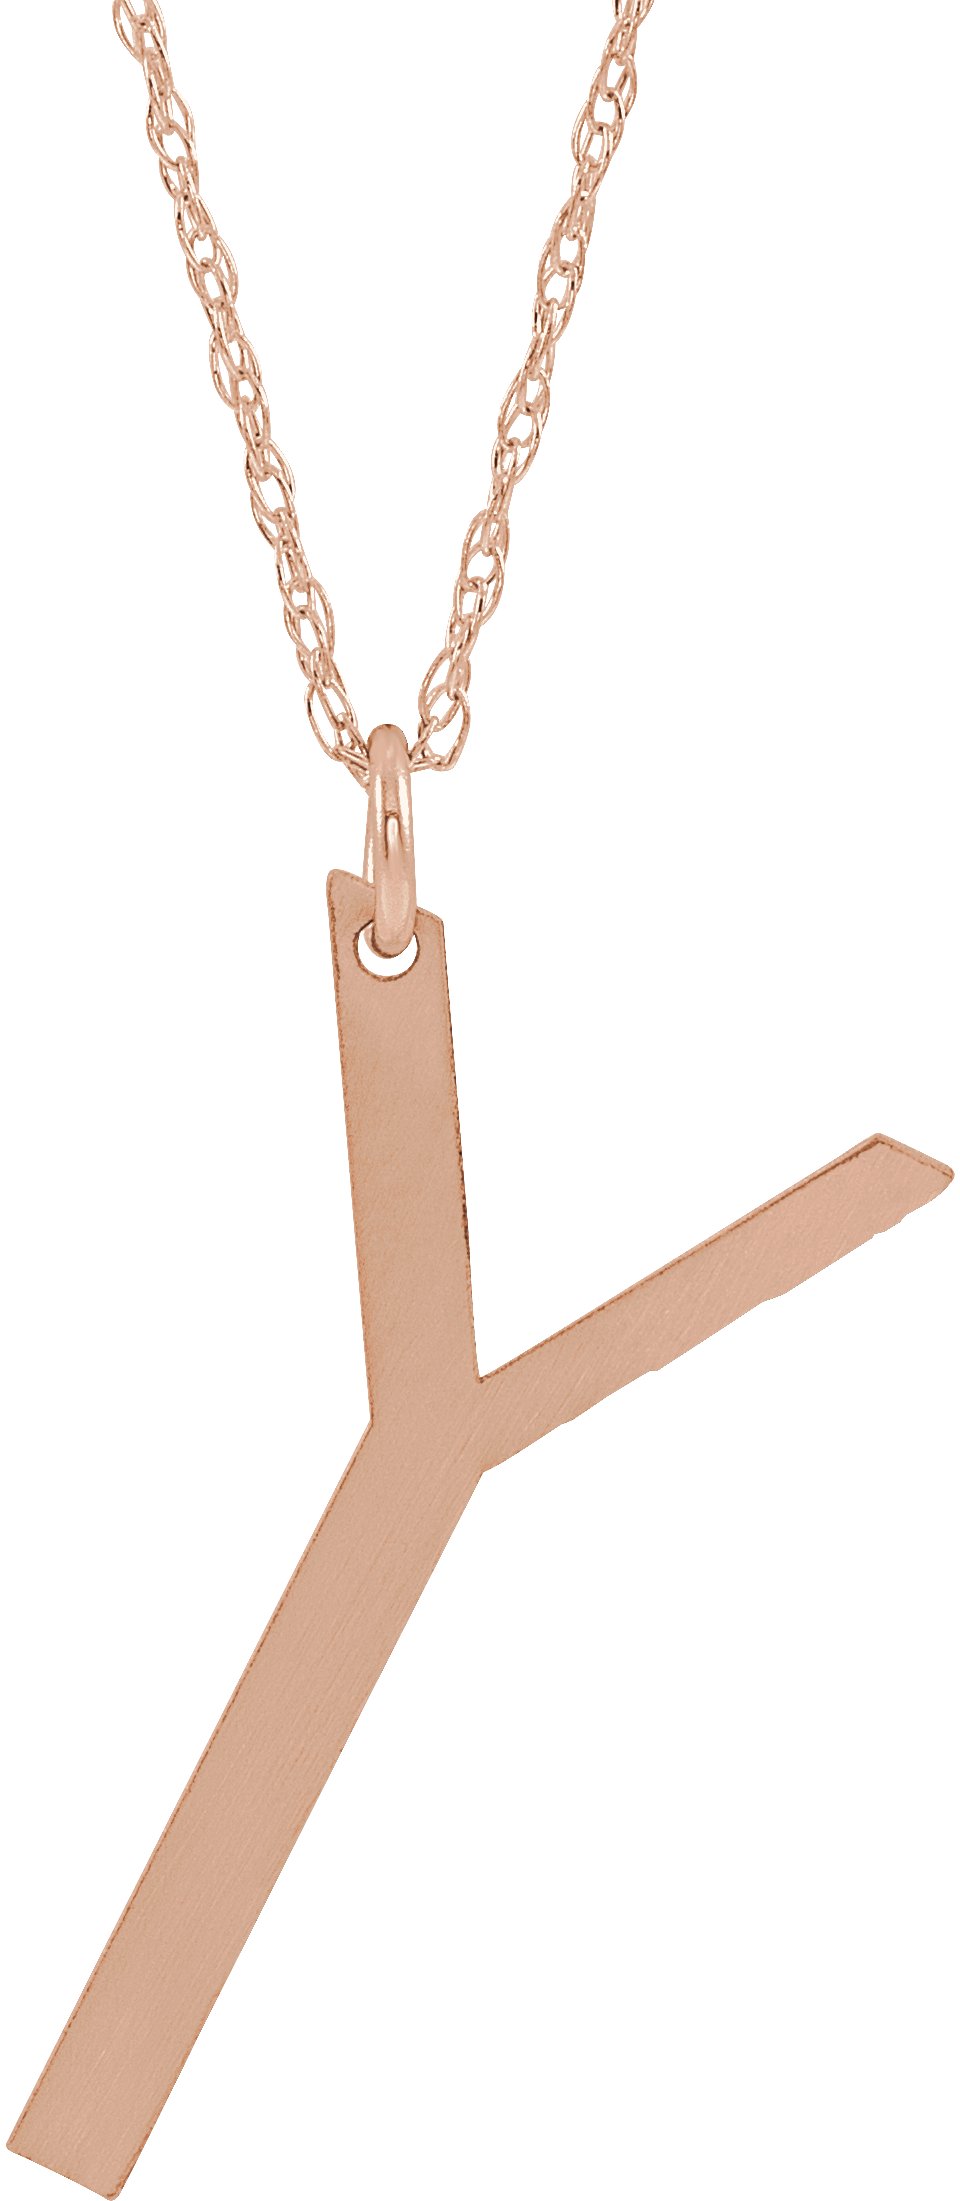 14K Rose Gold-Plated Sterling Silver Block Initial Y 16-18" Necklace with Brush Finish